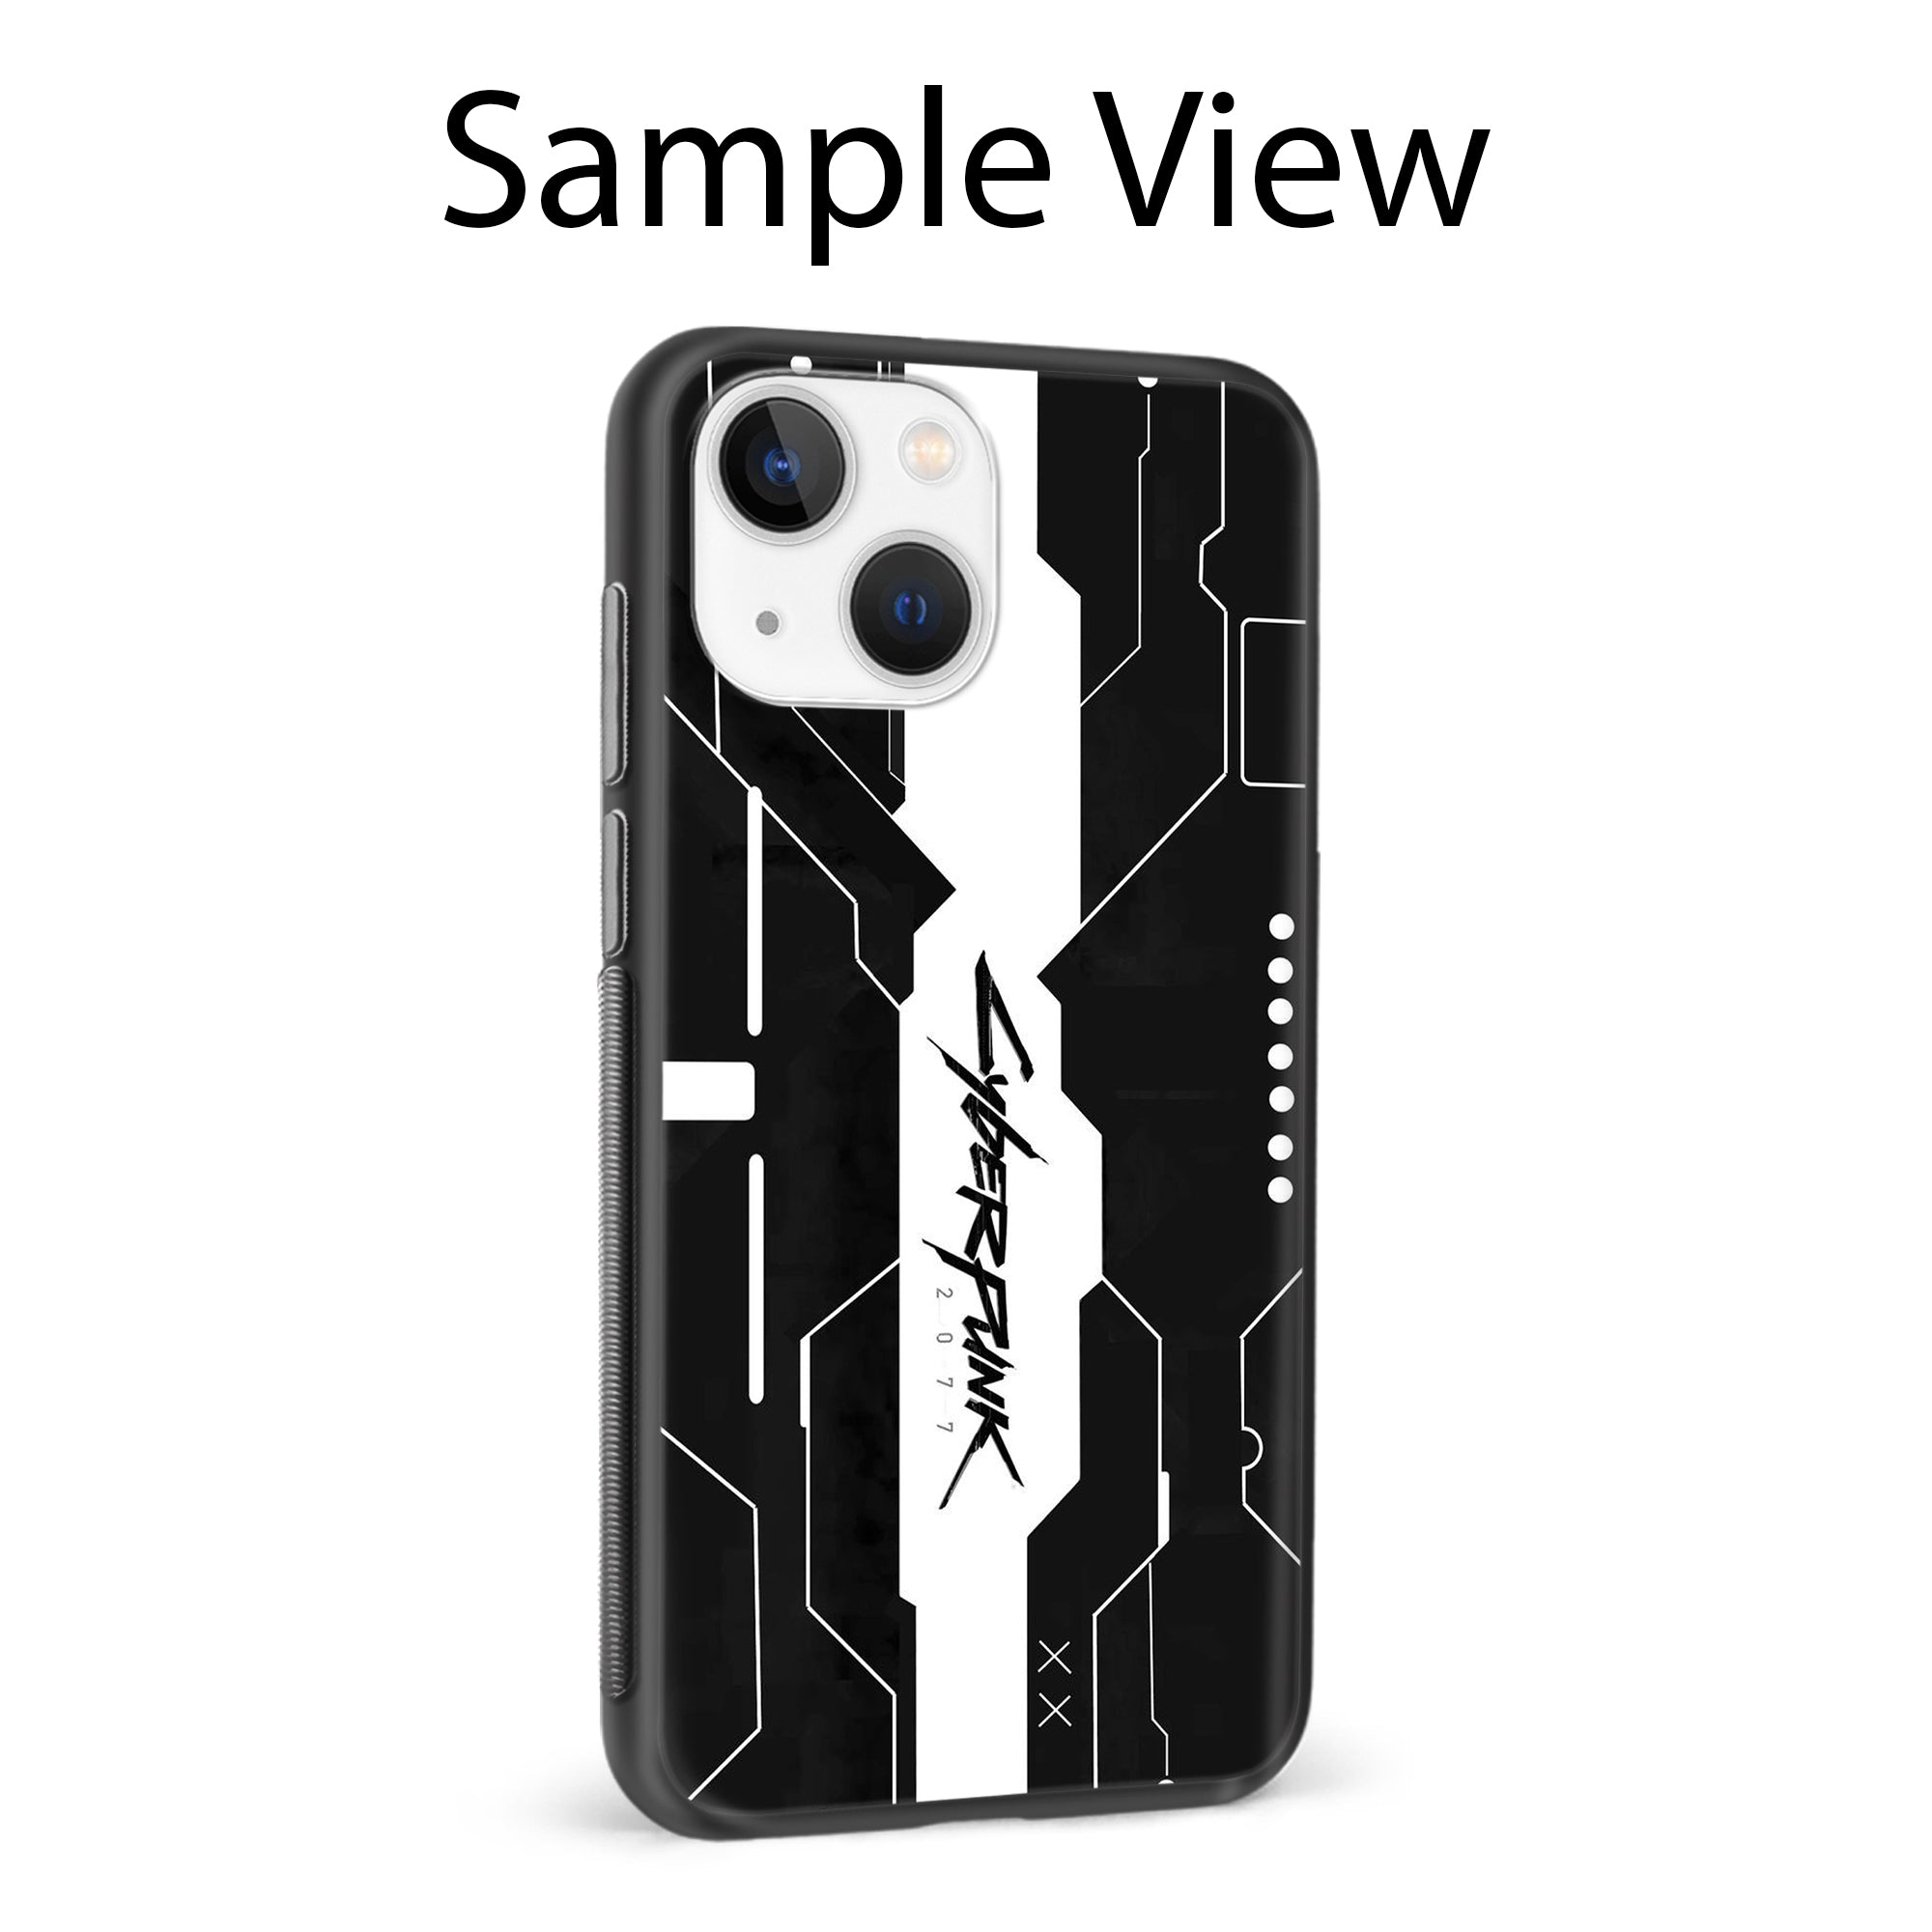 Buy Cyberpunk 2077 Art Metal-Silicon Back Mobile Phone Case/Cover For Samsung Galaxy A12 Online